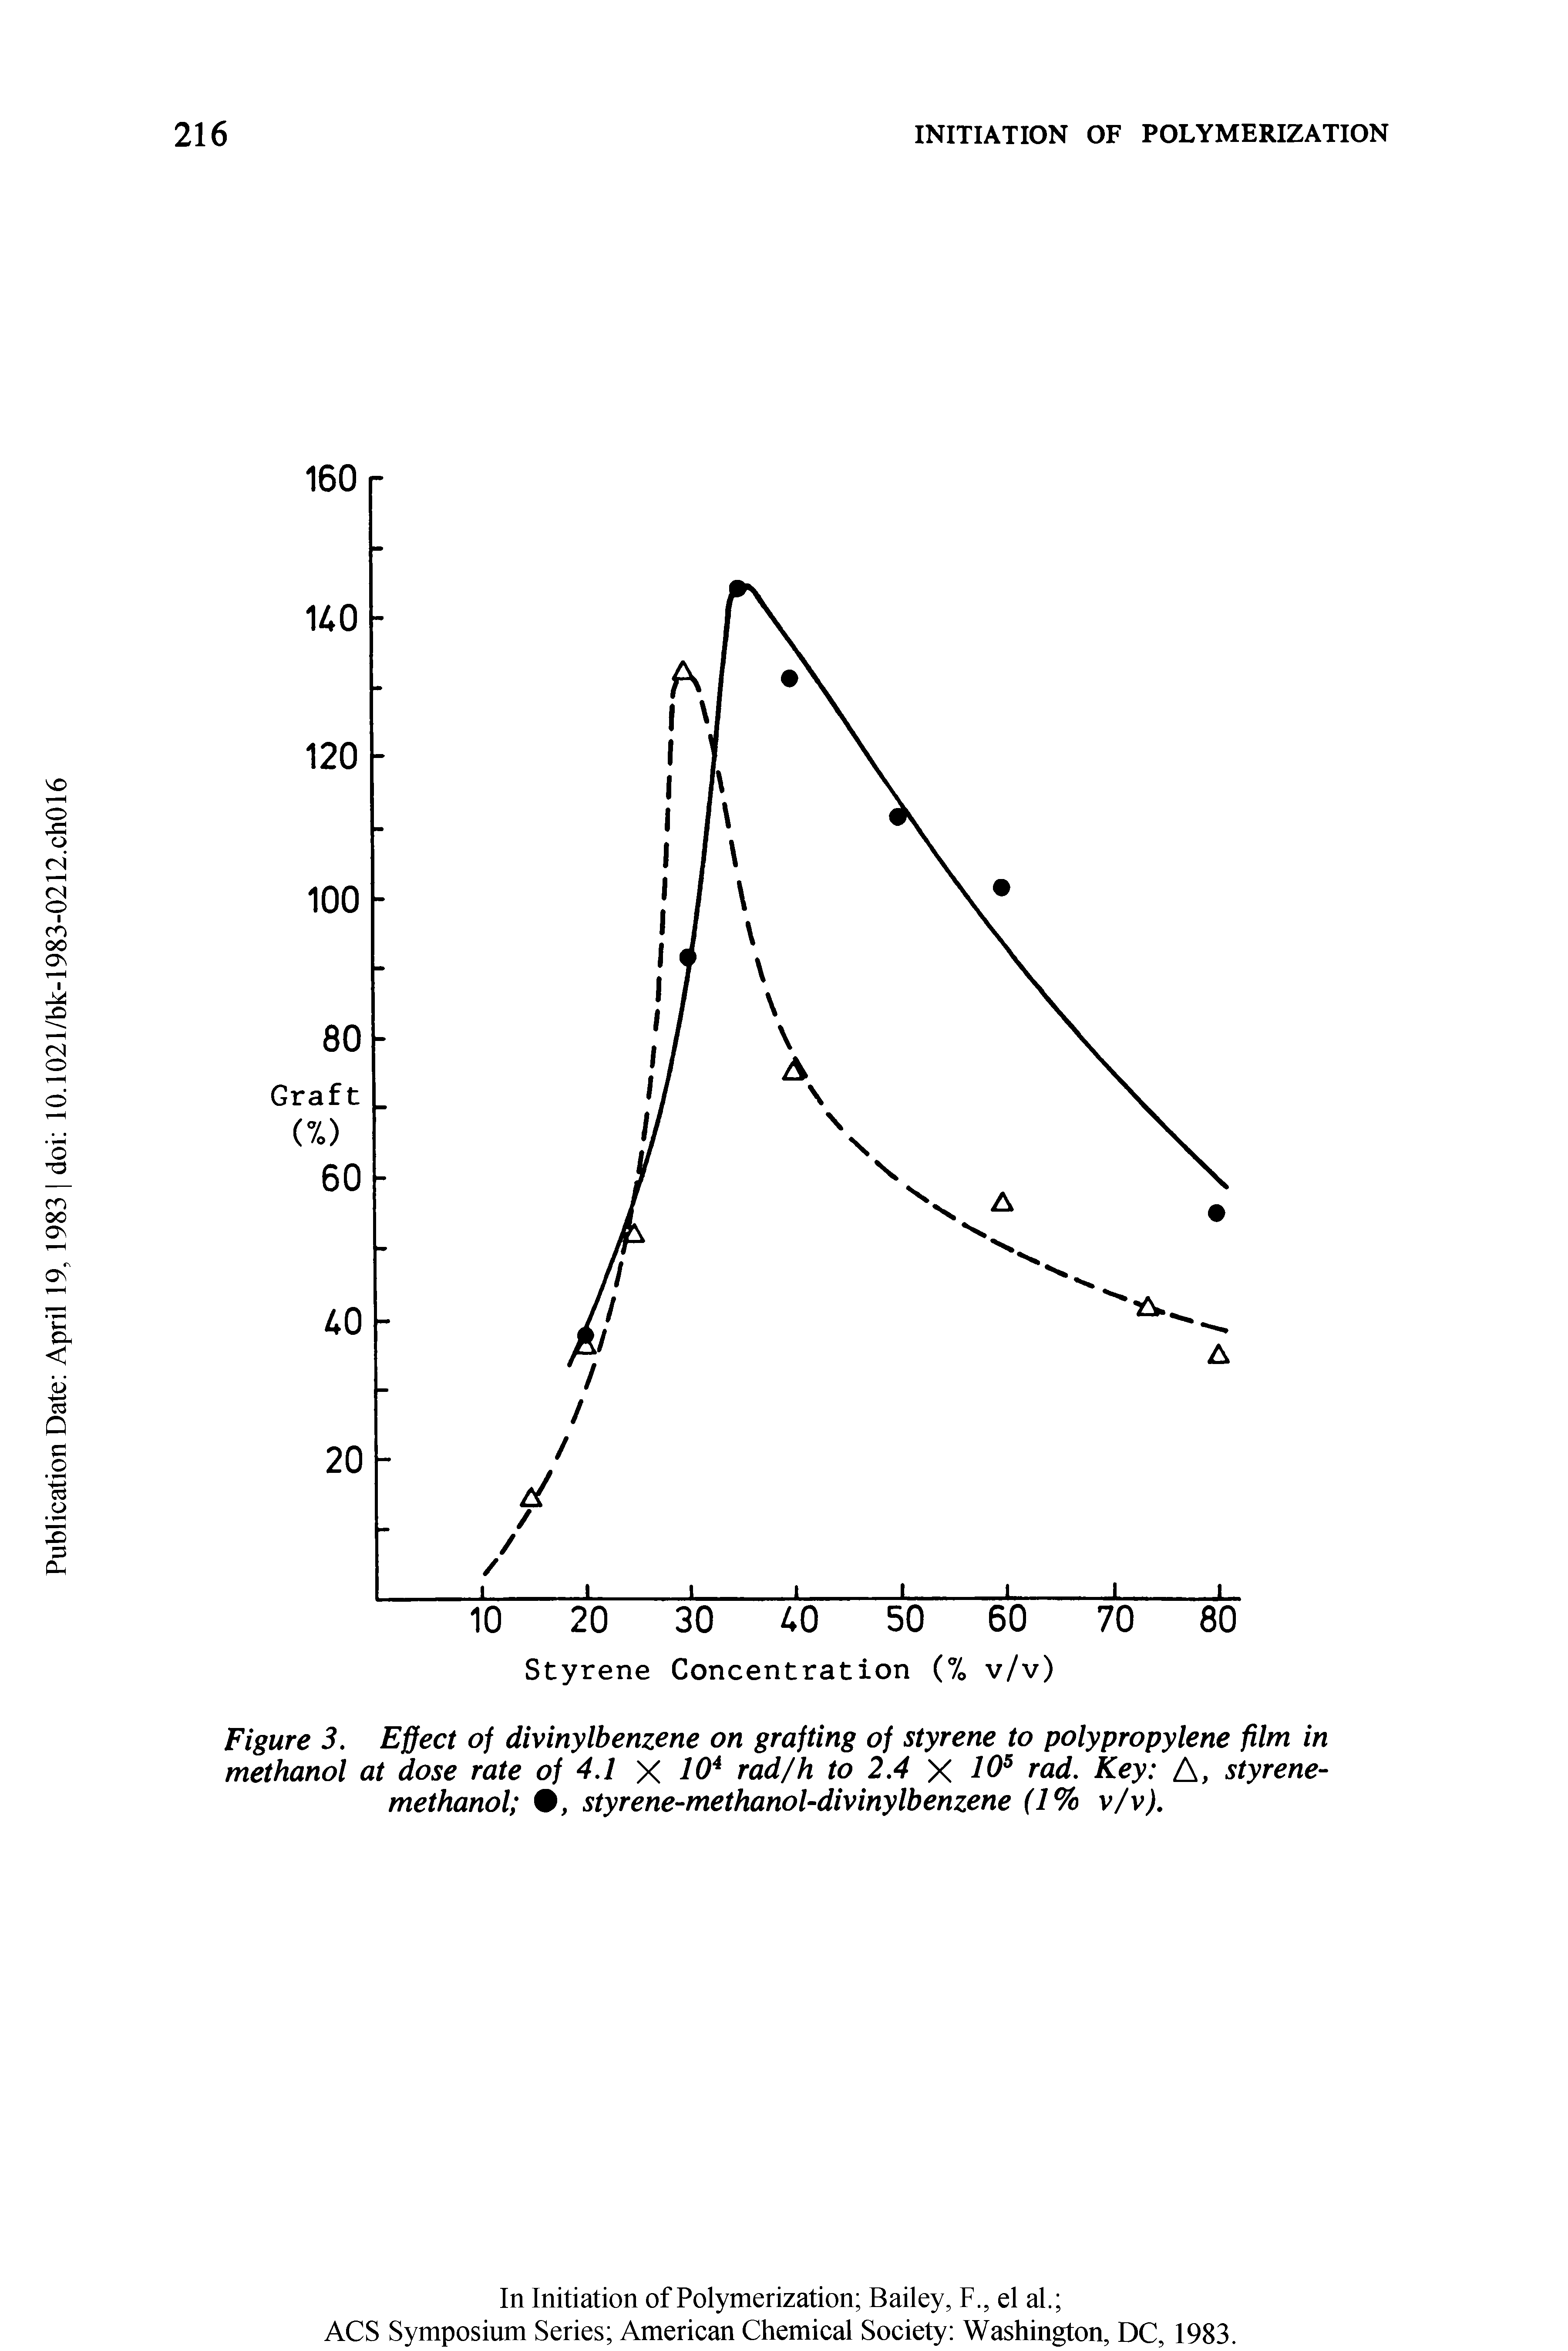 Figure 3. Effect of divinylbenzene on grafting of styrene to polypropylene film in methanol at dose rate of 4.1 X 10 rad/h to 2.4 X 10 rad. Key A, styrene-methanol , styrene-methanol-divinylbenzene (1% v/v).